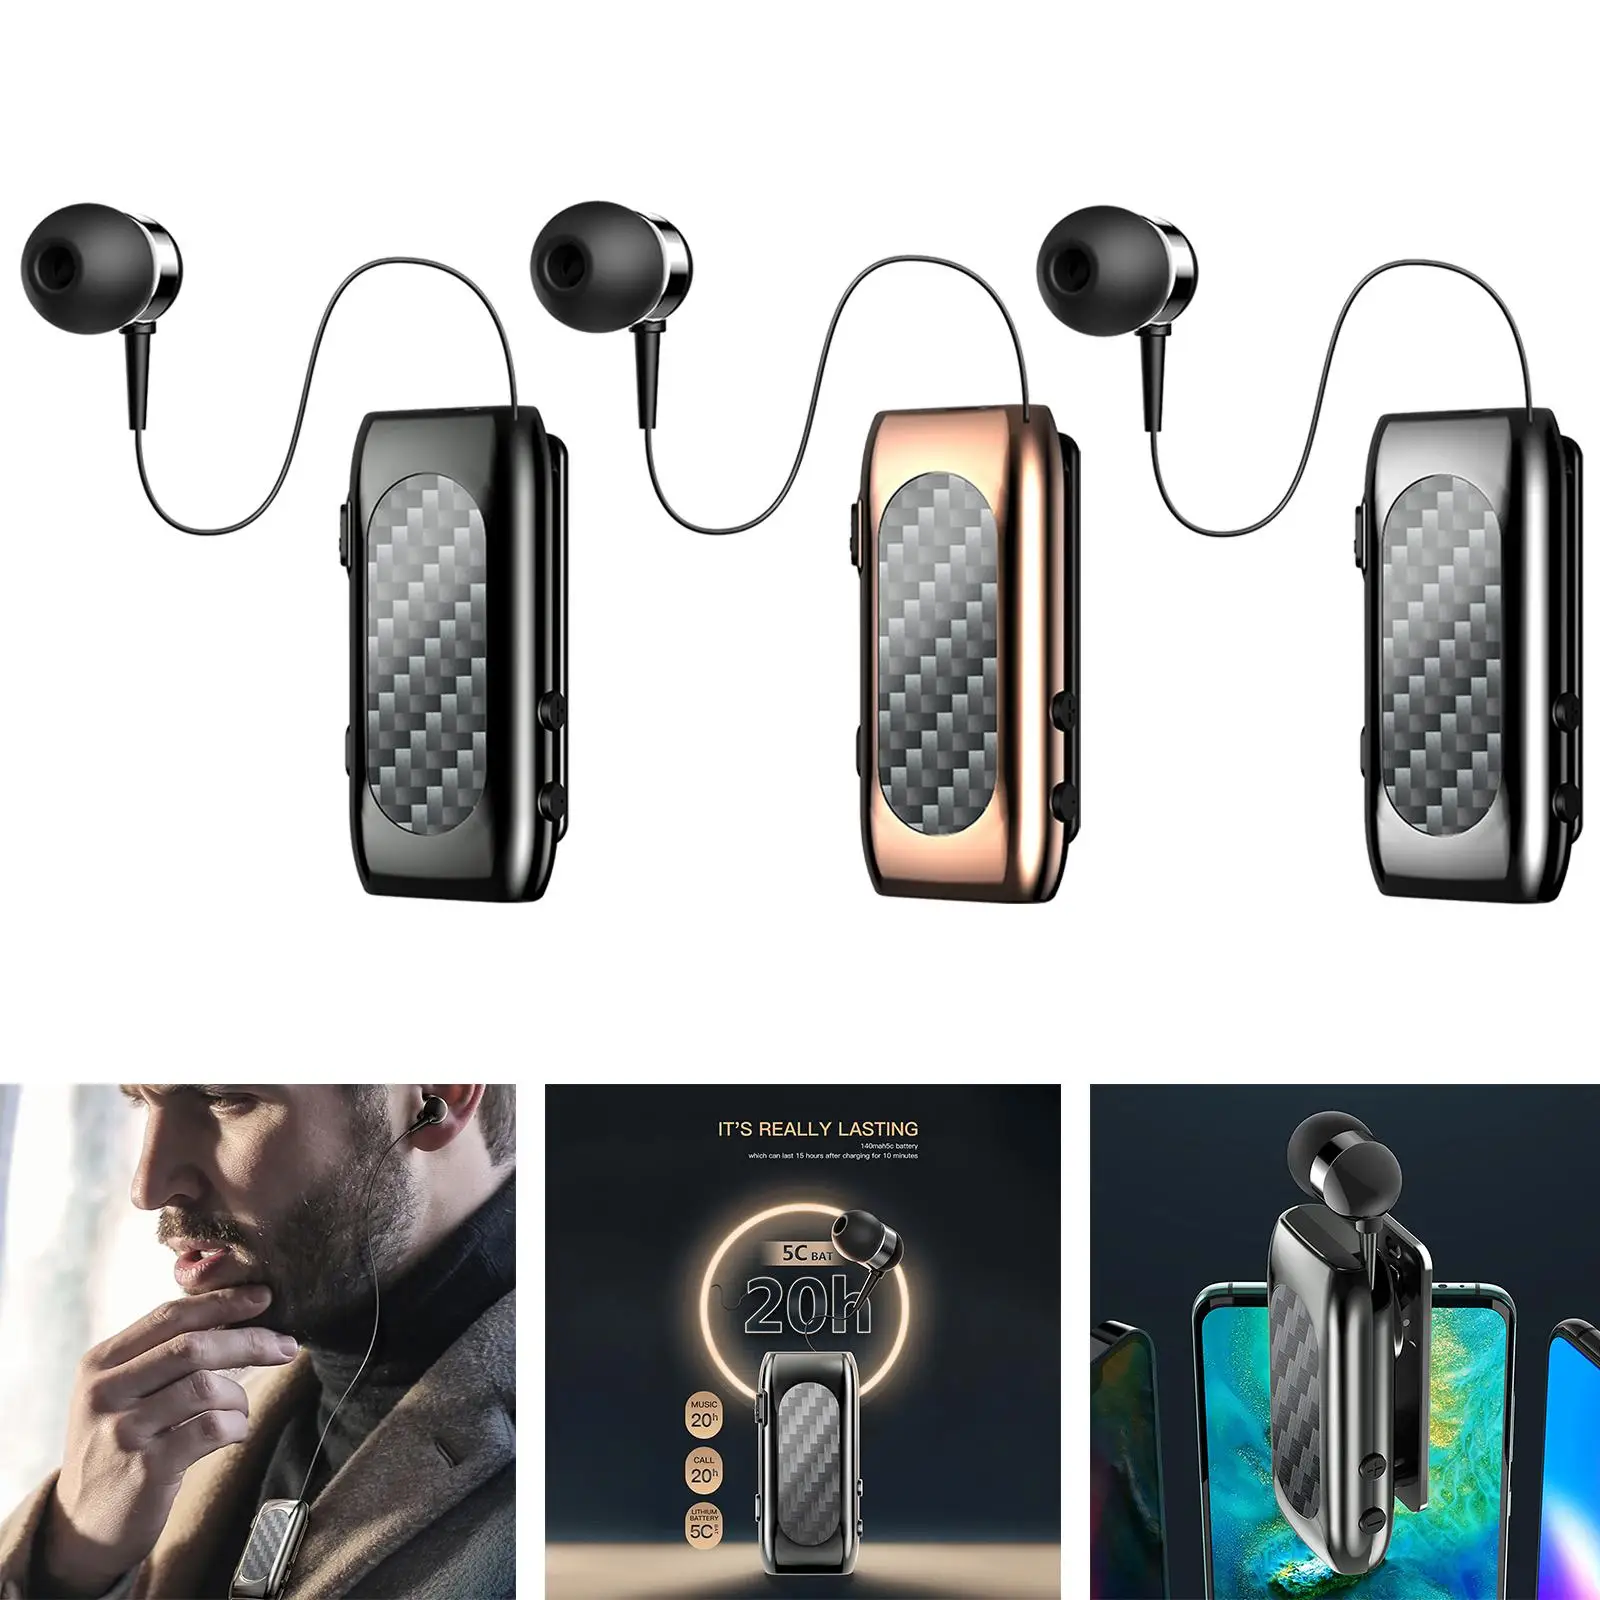 Retractable Bluetooth 5.2 Lavalier Earphone Portable with Clip Hands Free Stereo Wireless Earbud for Running Workout Office Gym